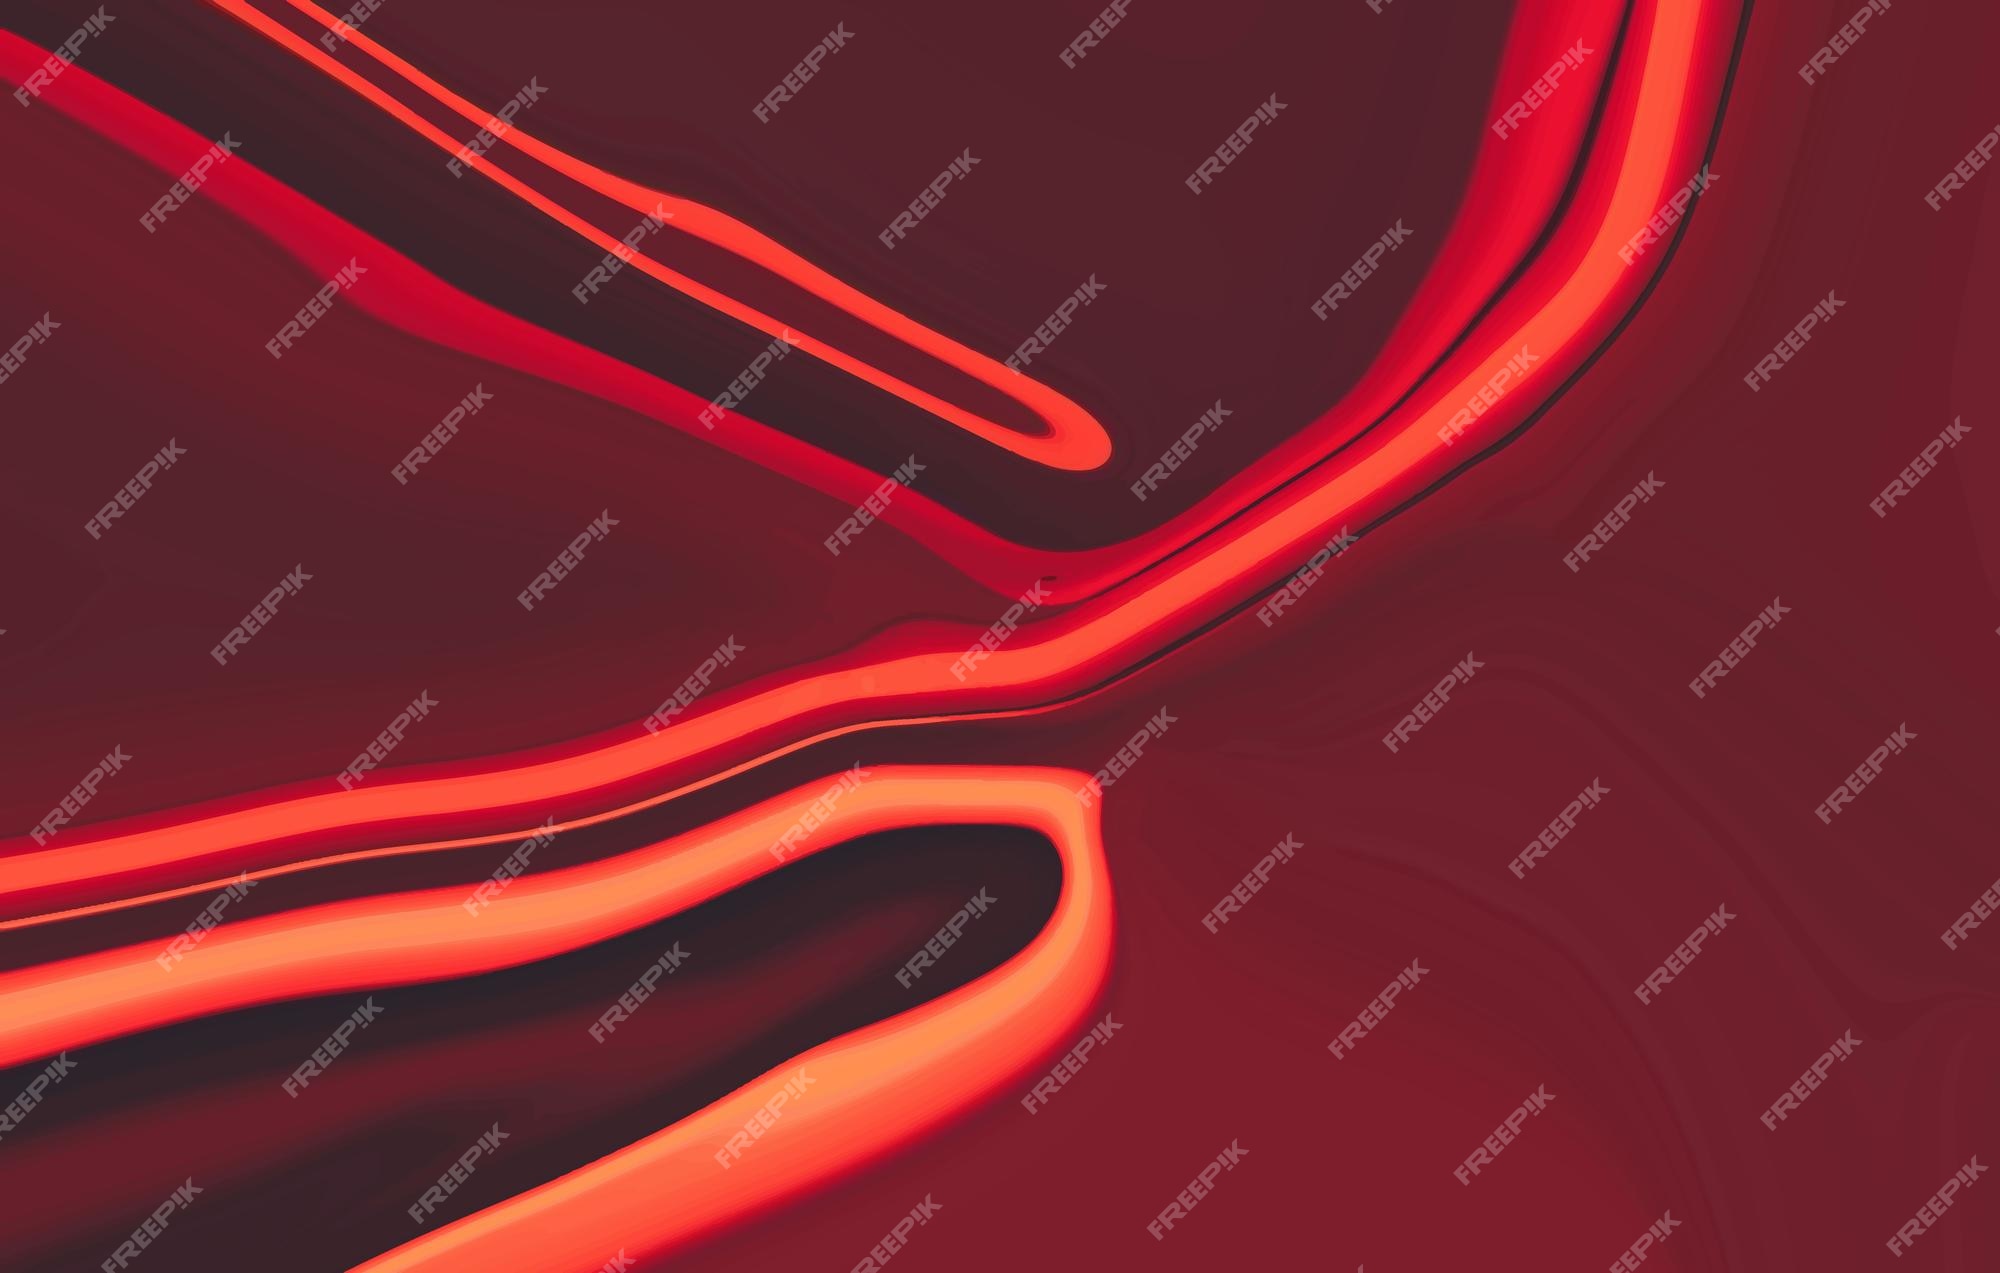 Premium Vector | Abstract bright glossy liquid texture background with red  color